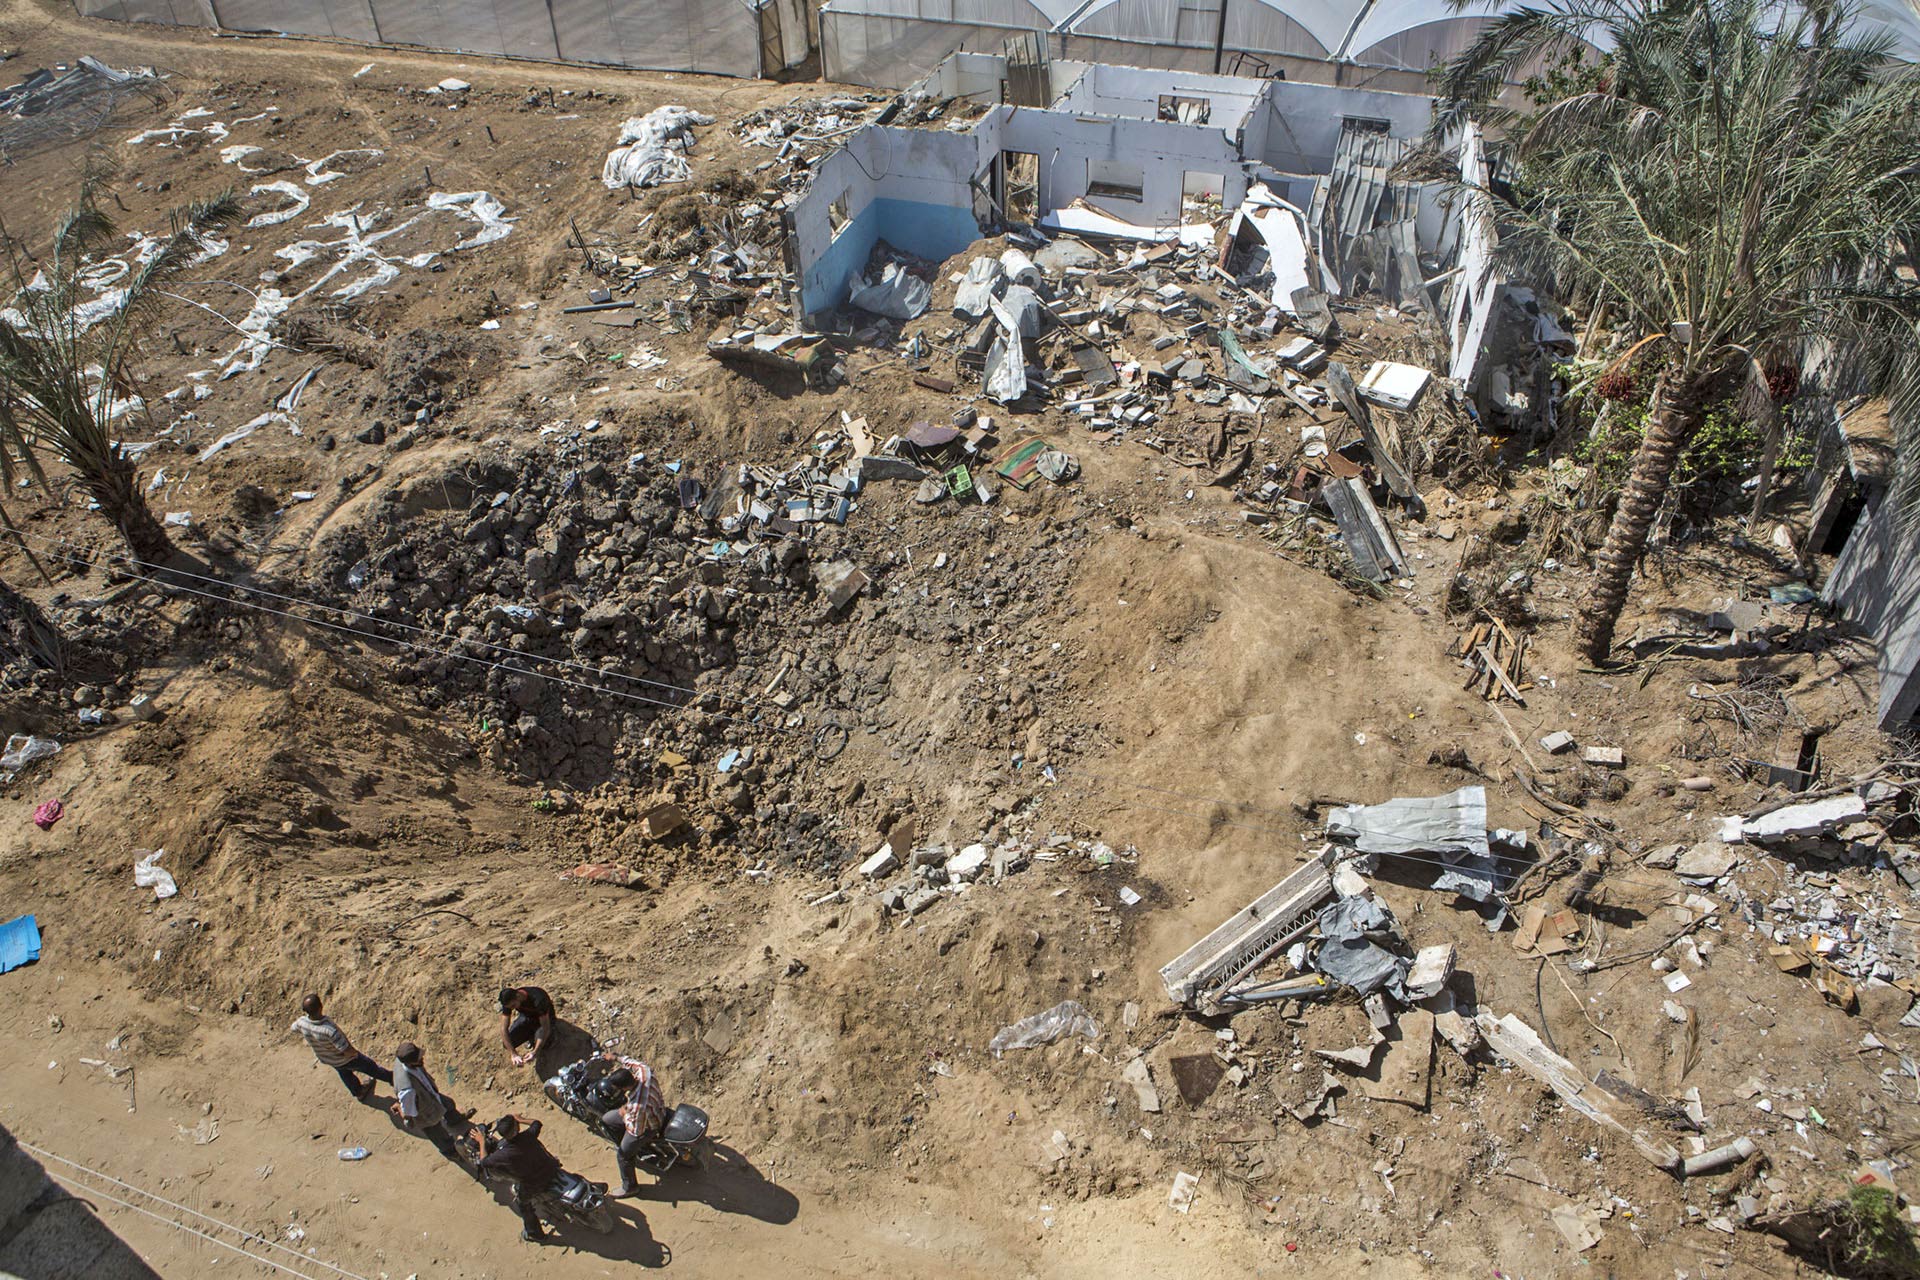 Seven trucks of sand were not enough to fill the bombed-out crater where Rafat's house once stood.
